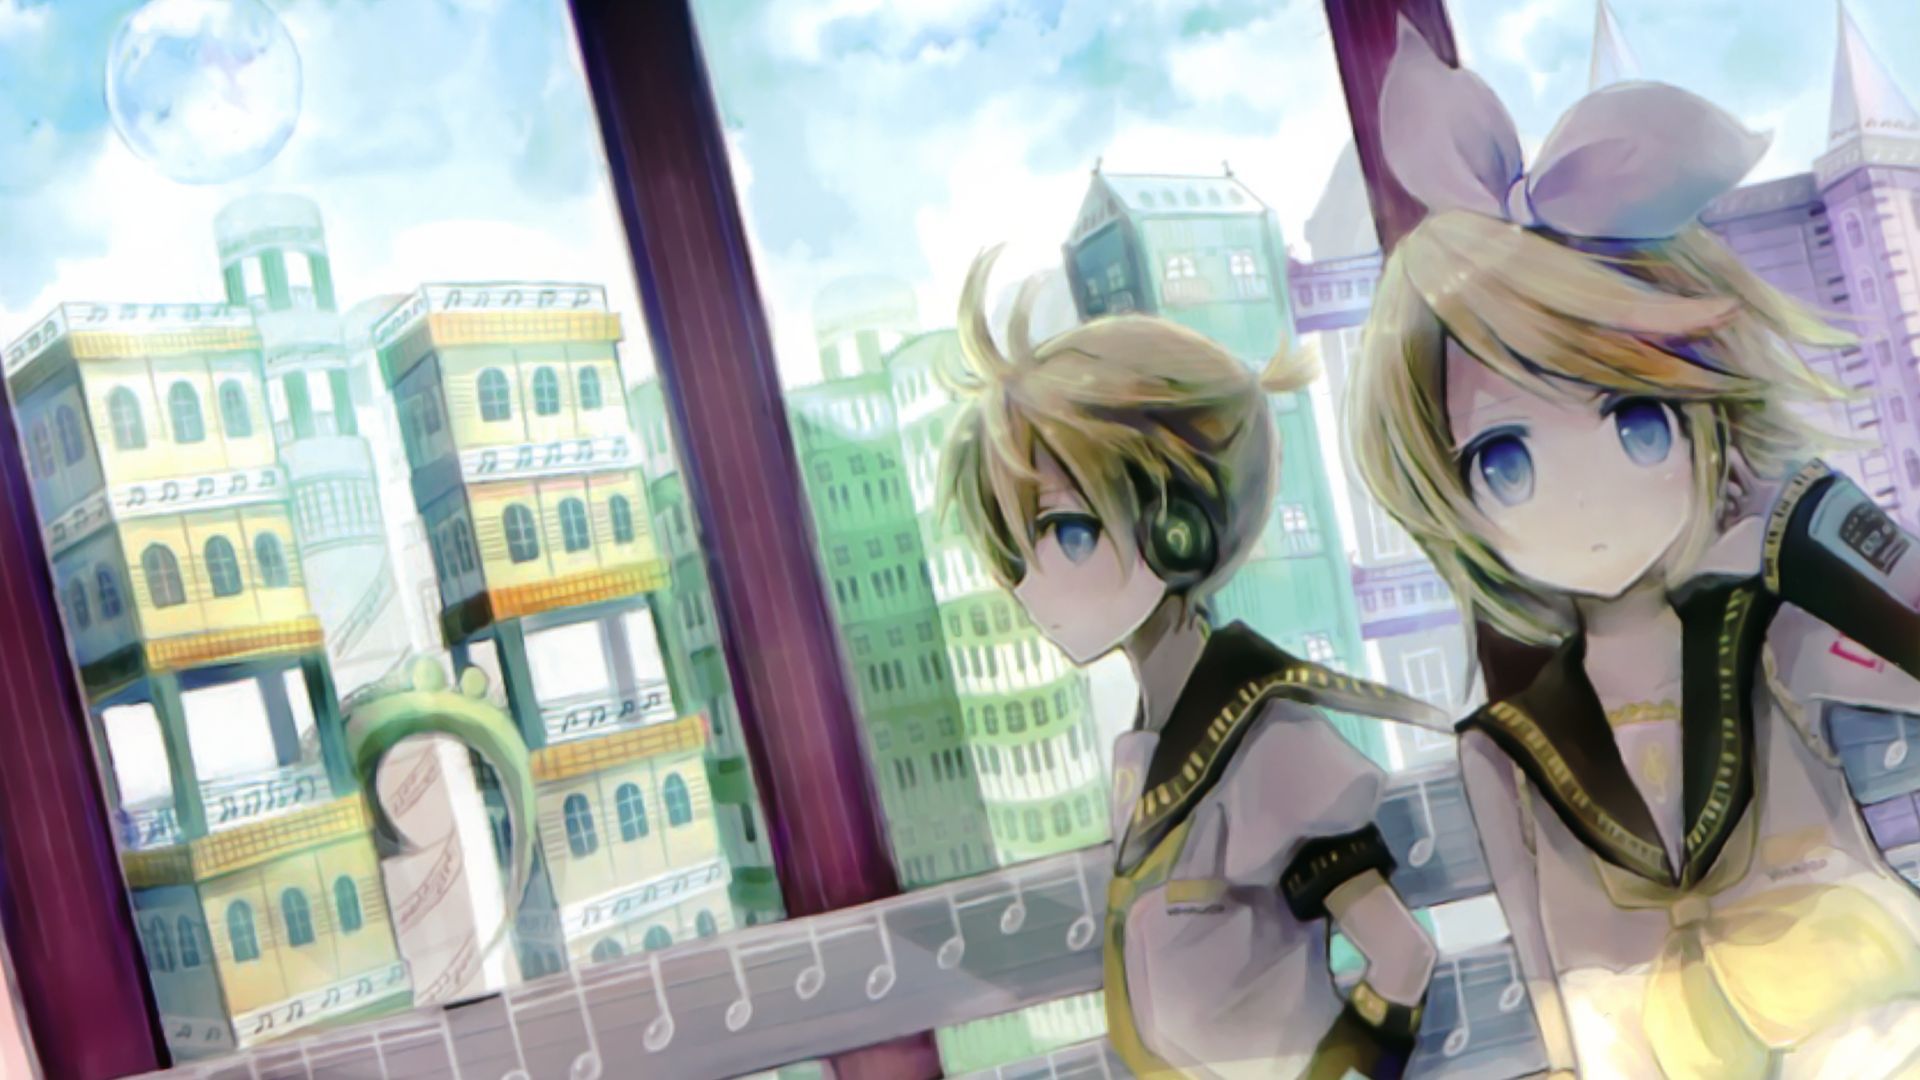 Kagamine Rin and Len looking out the window at the city. - 